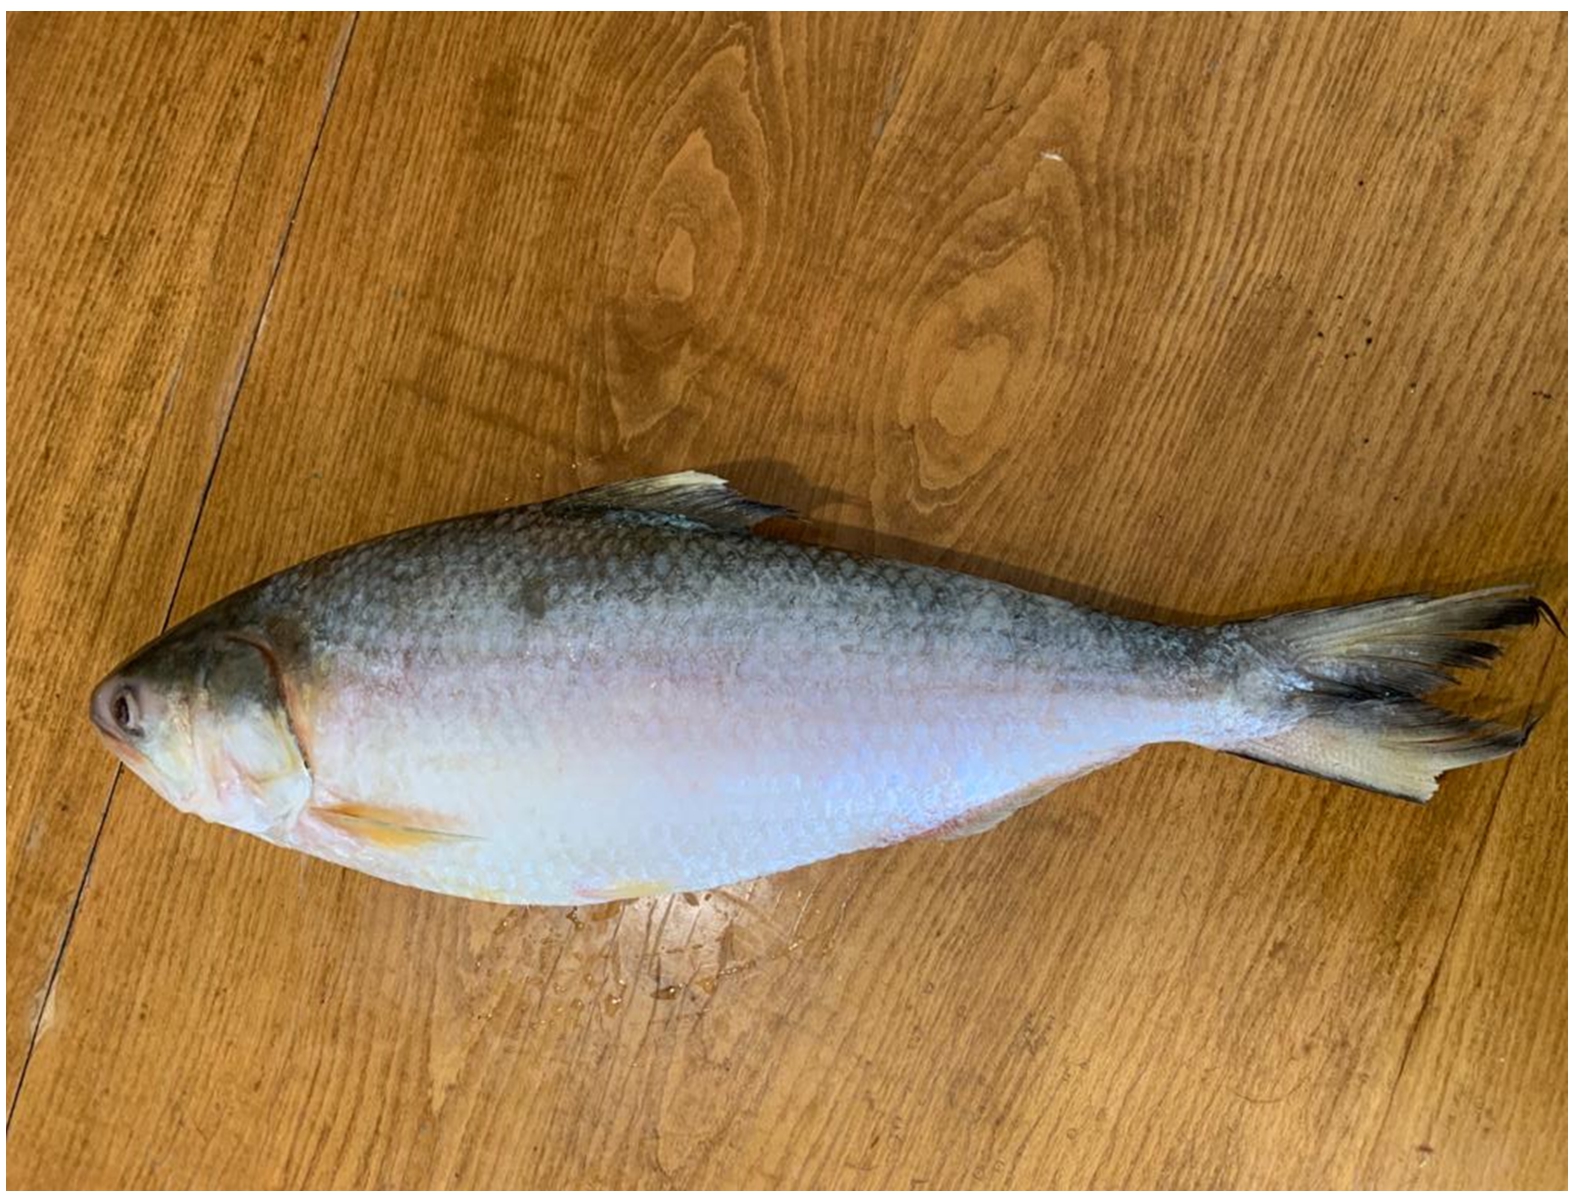 Example of a big fish investigated in this study. This is Hilsa fish from Bangladesh purchased from an ethnic supermarket in the UK. The length of the Hilsa fish can vary, for example from 168 mm-590 mm (Salini et al. [56], Rahman and Cowx [52]).